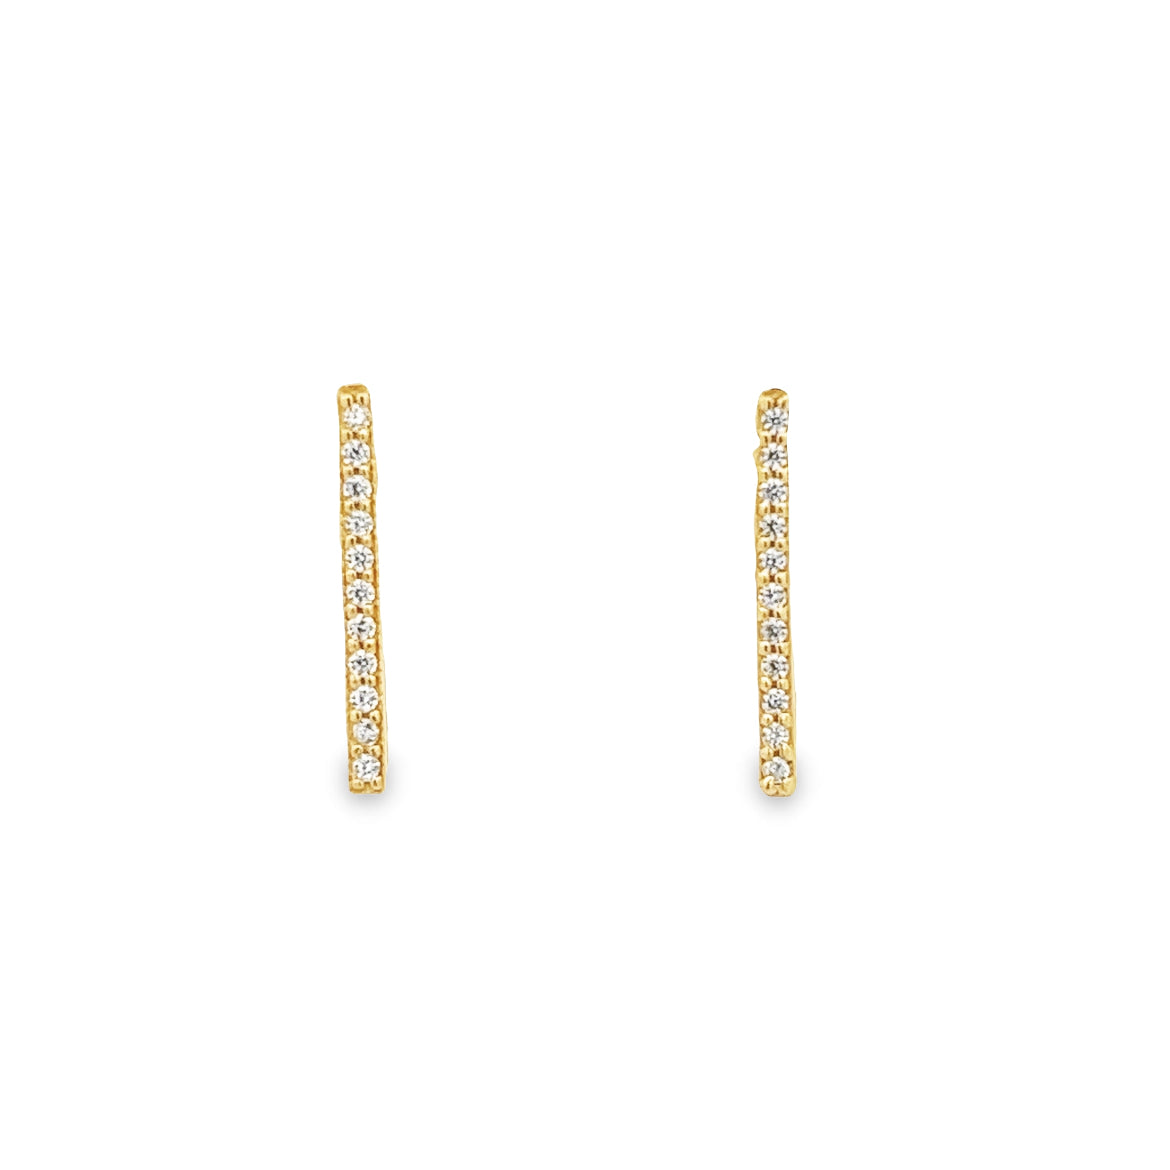 925 SILVER GOLD PLATED BAR EARRINGS